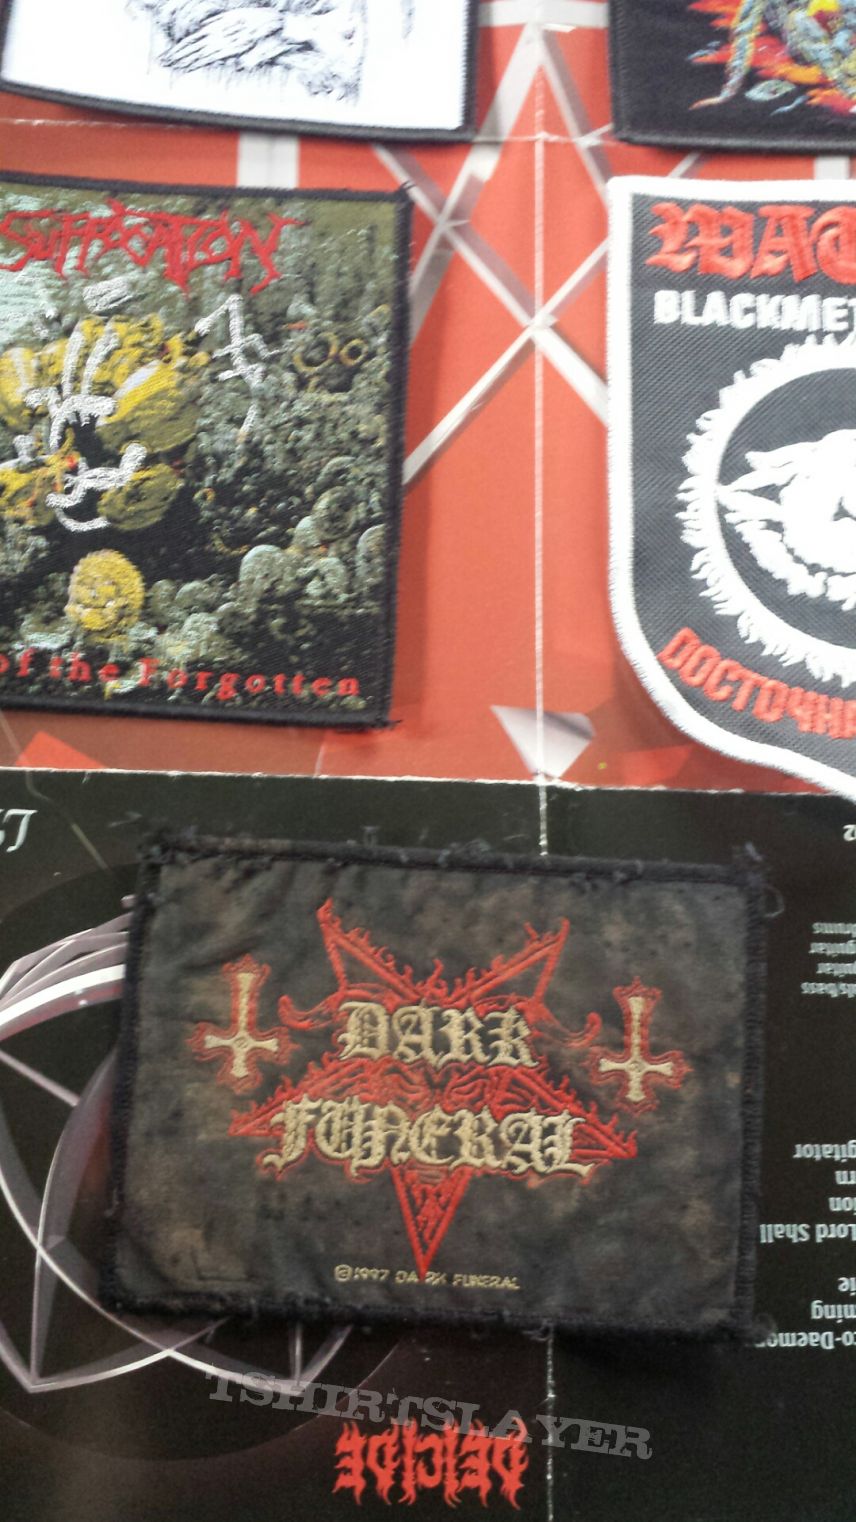 Dark Funeral Some Patches